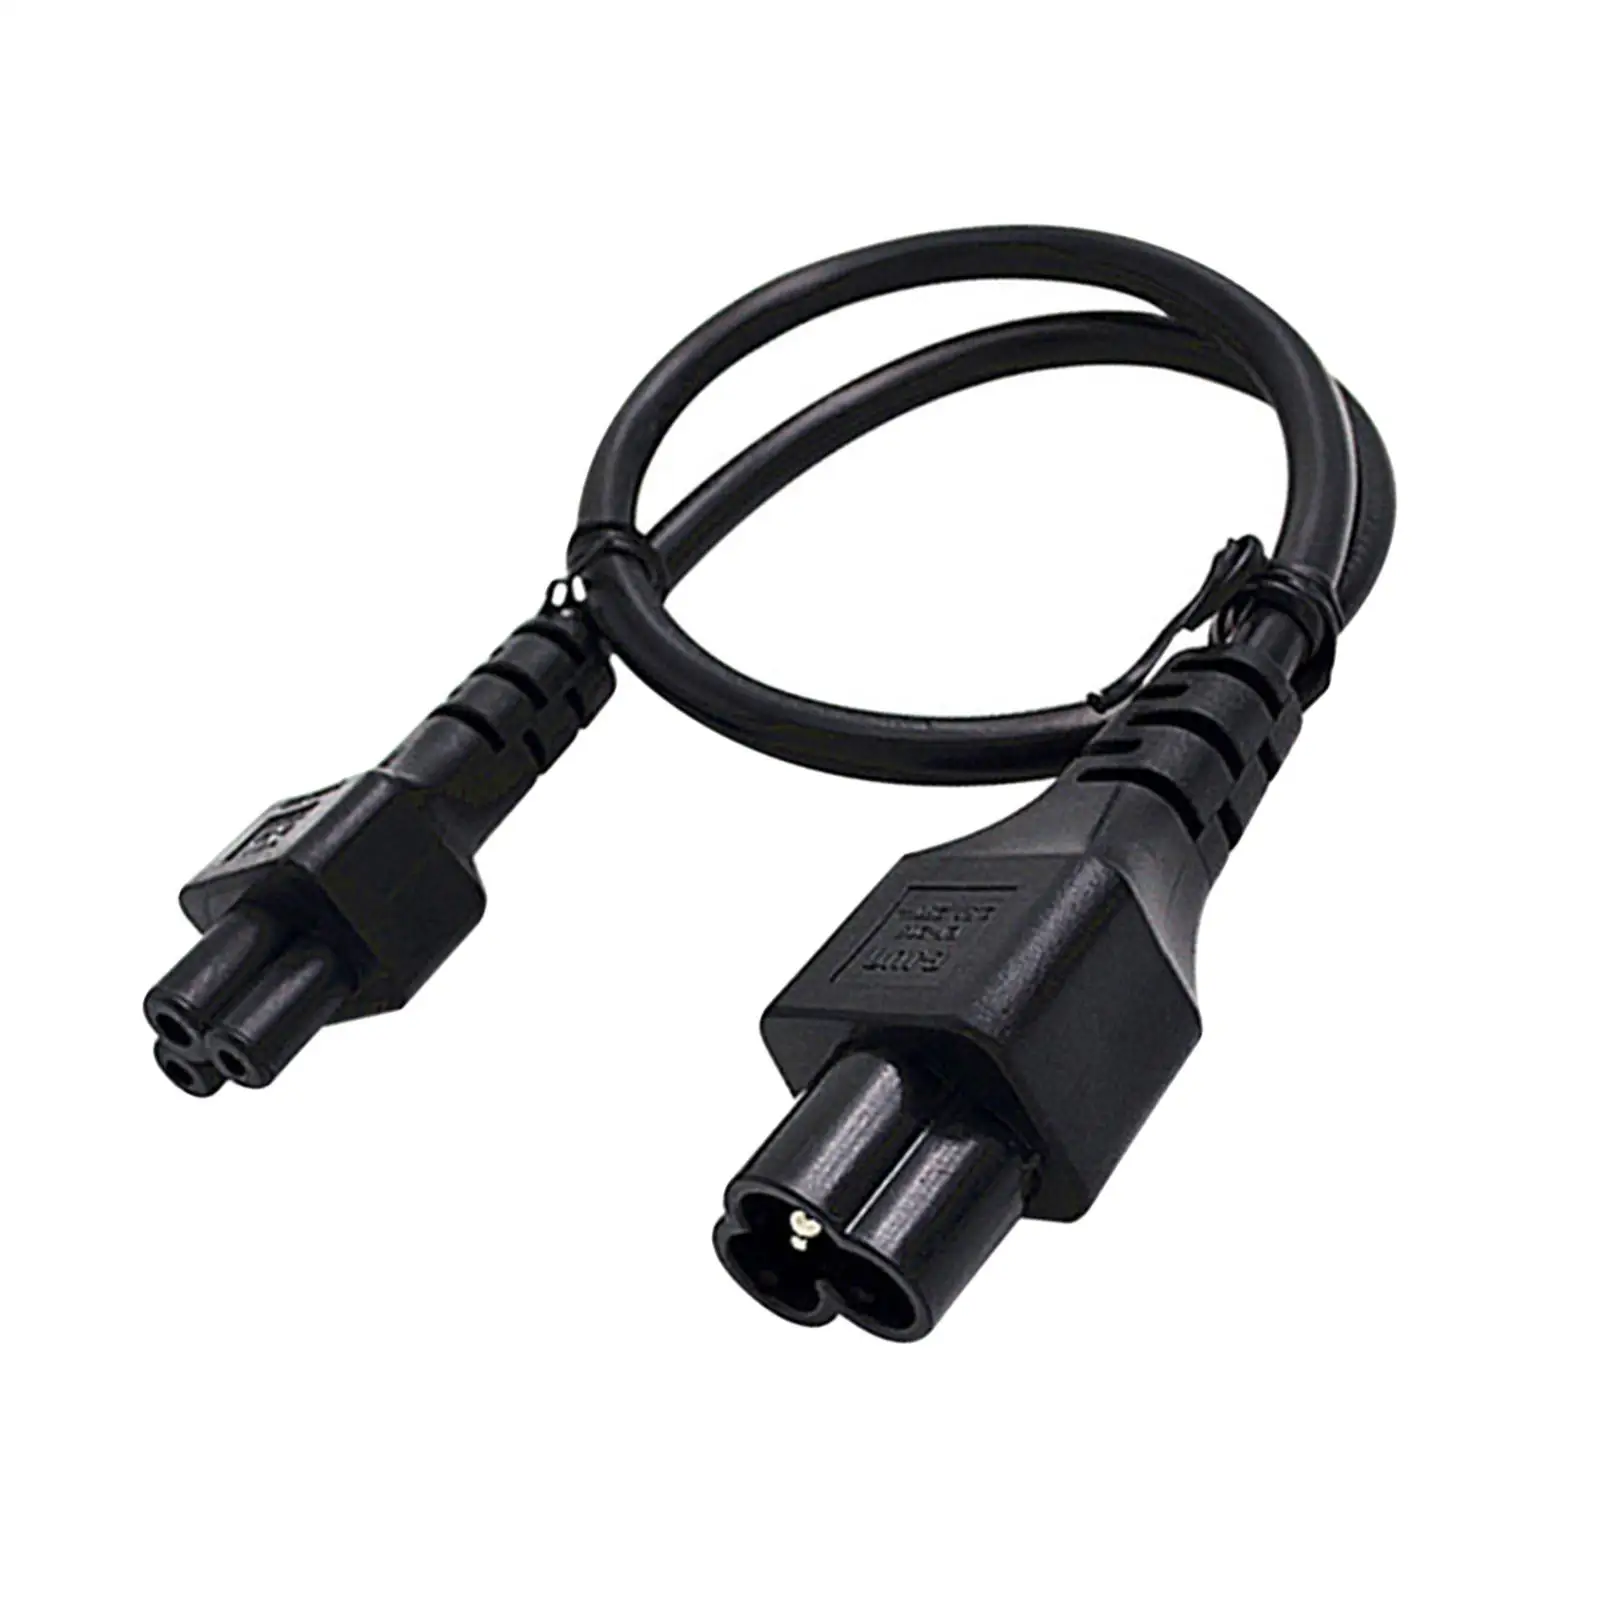 C6 to C5 PC Power Cord Cable Low Resistance Stable Transmission for Scanner Computer